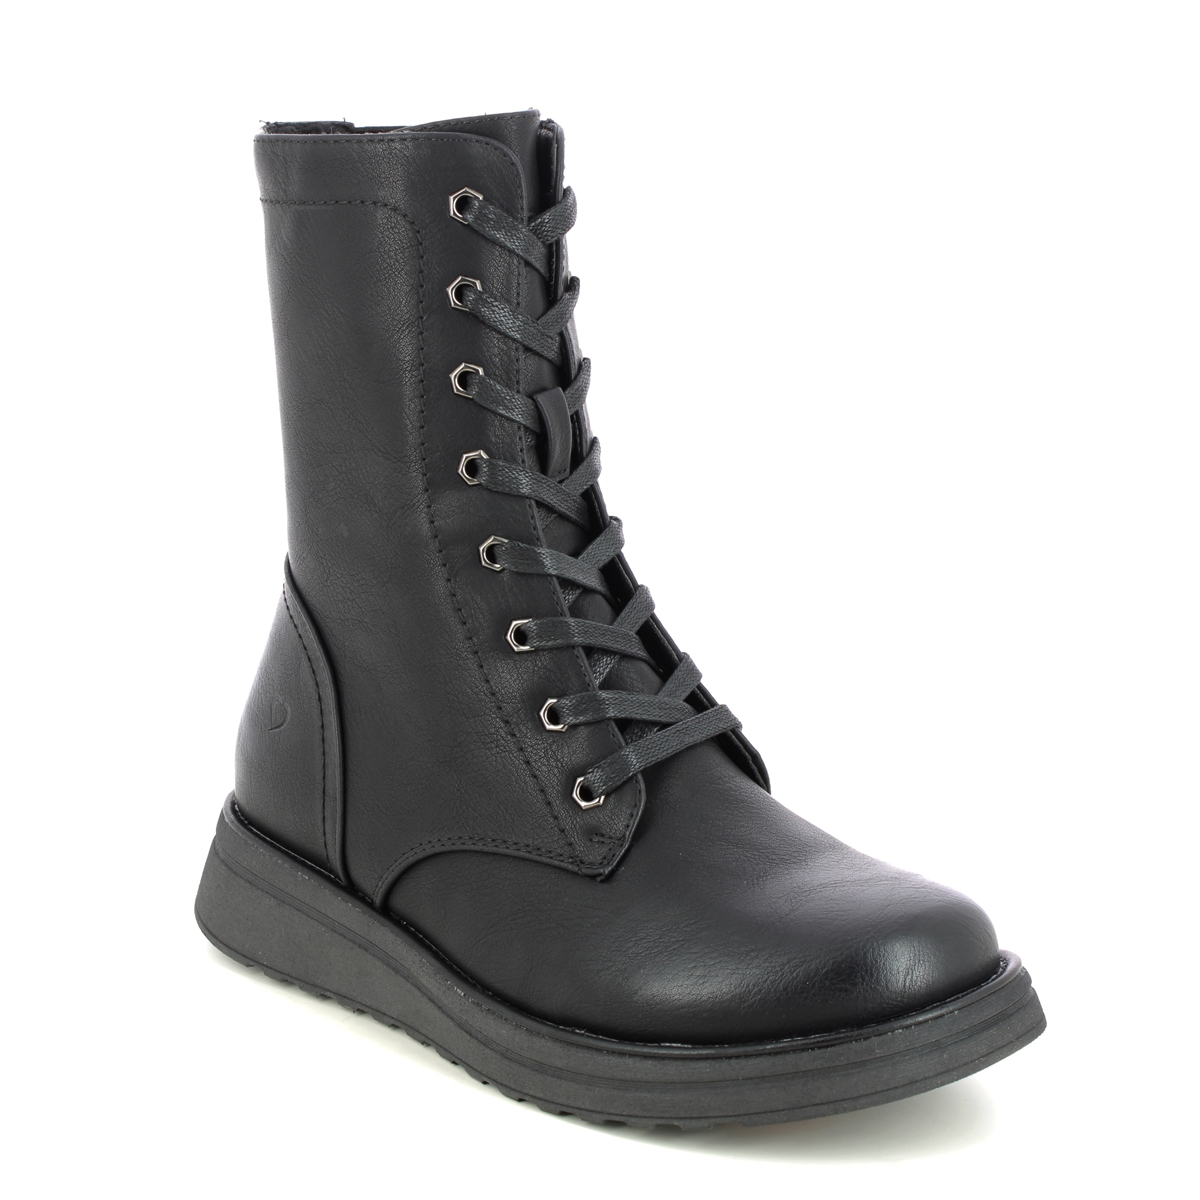 Heavenly Feet Martina Walker Black Womens Lace Up Boots 3509-34 In Size 5 In Plain Black